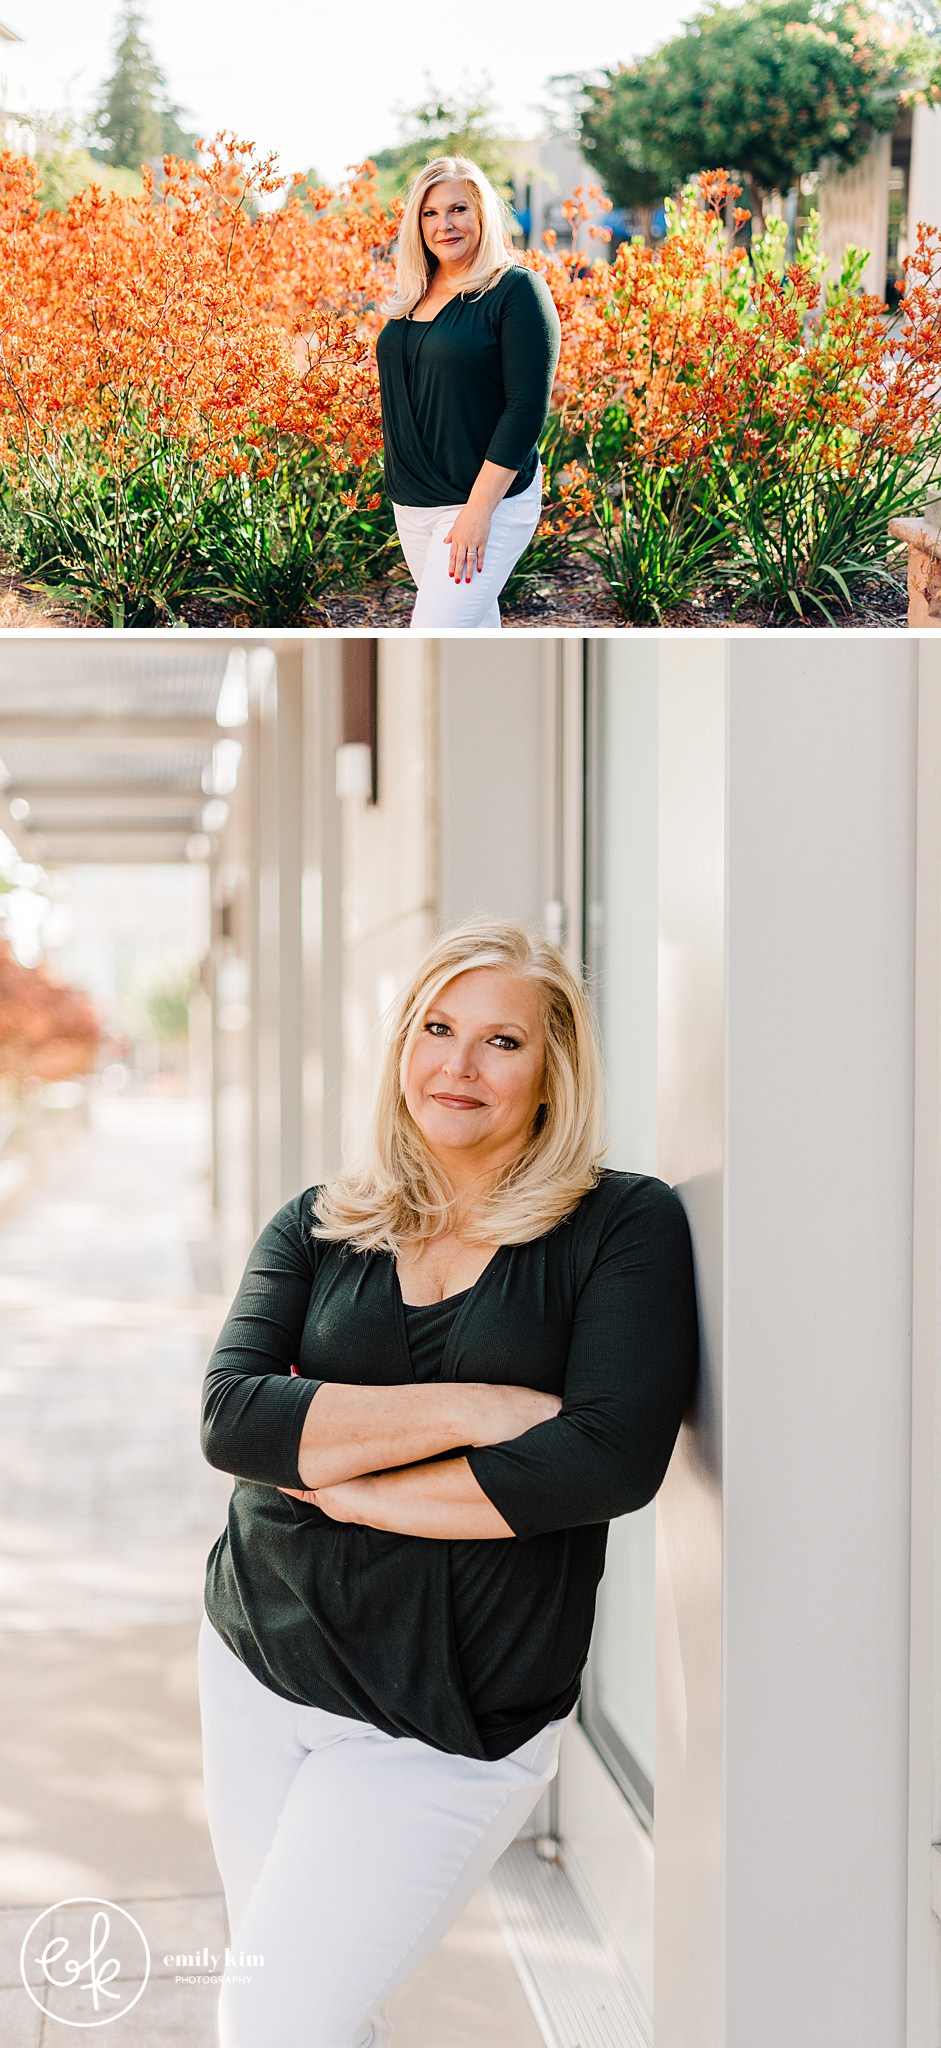 Collage of lifestyle headshots for a female business owner in downtown Mountain View